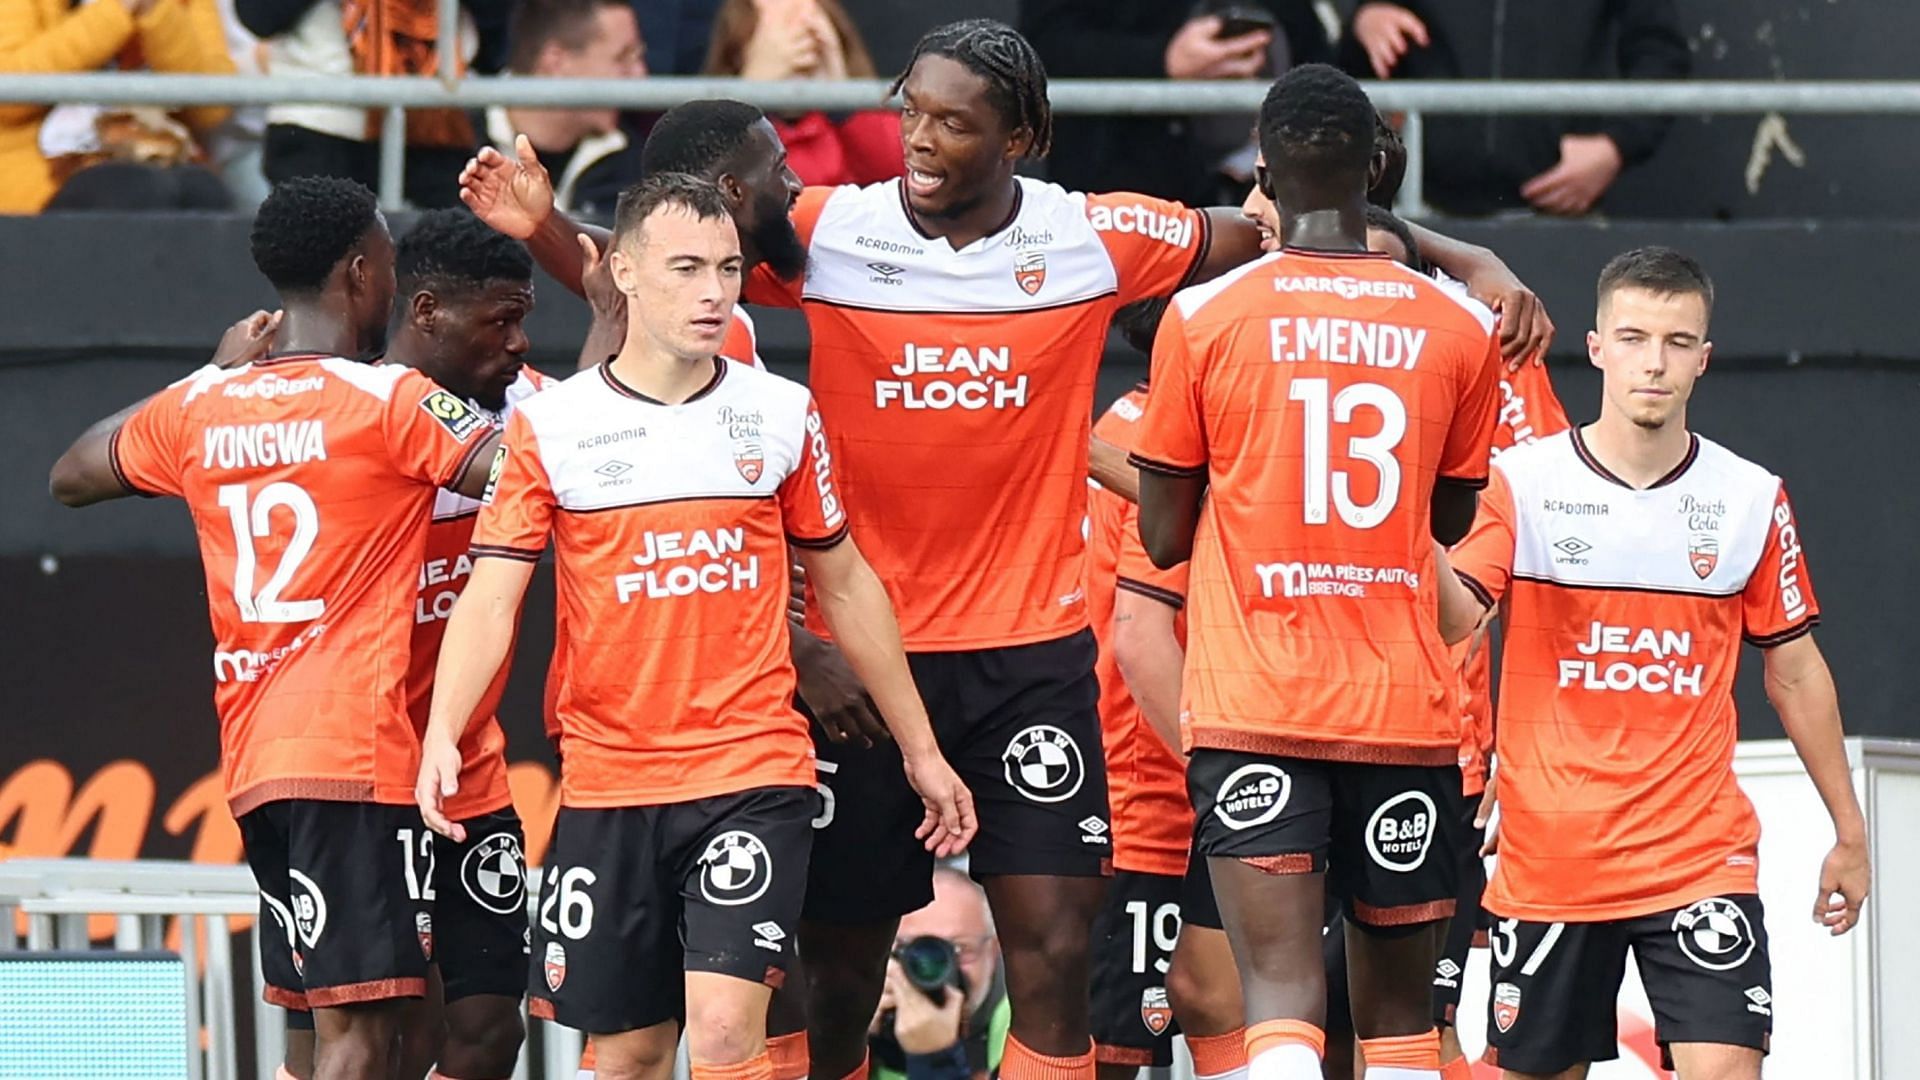 Can Lorient pick up a positive result against Metz this weekend?